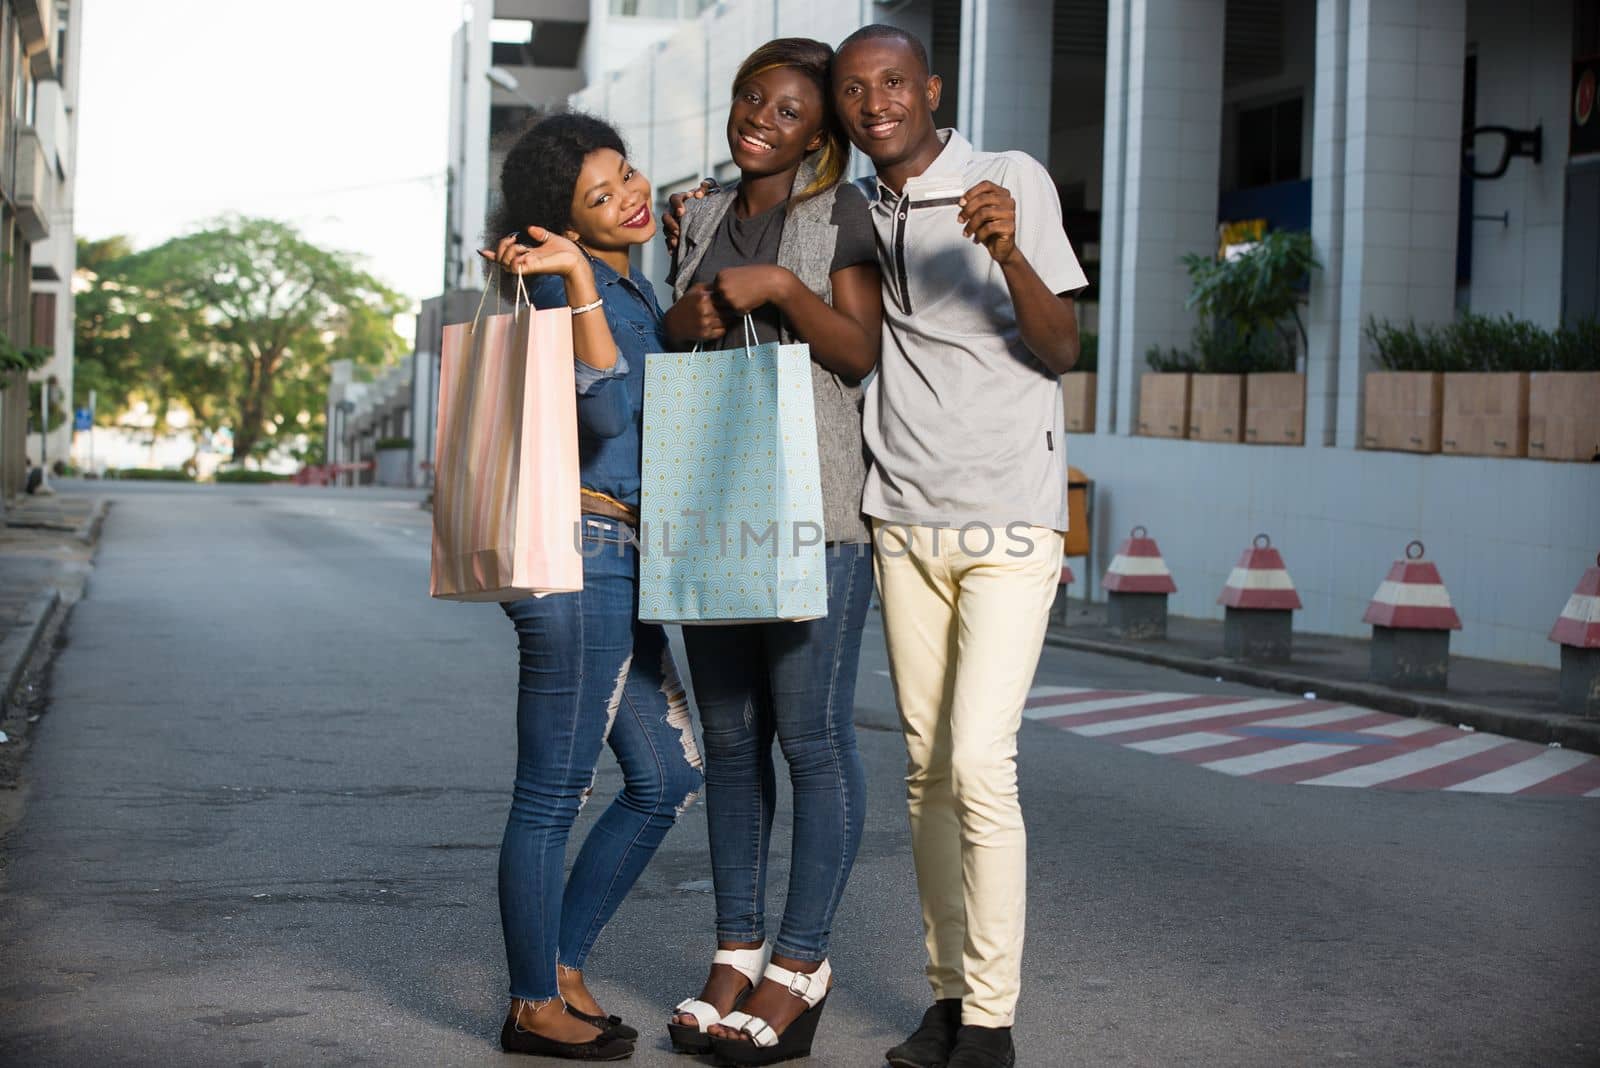 Group of happy young people doing shopping together, holding bags of outdoor shopping and a credit card. Group concept of outdoor shopping.